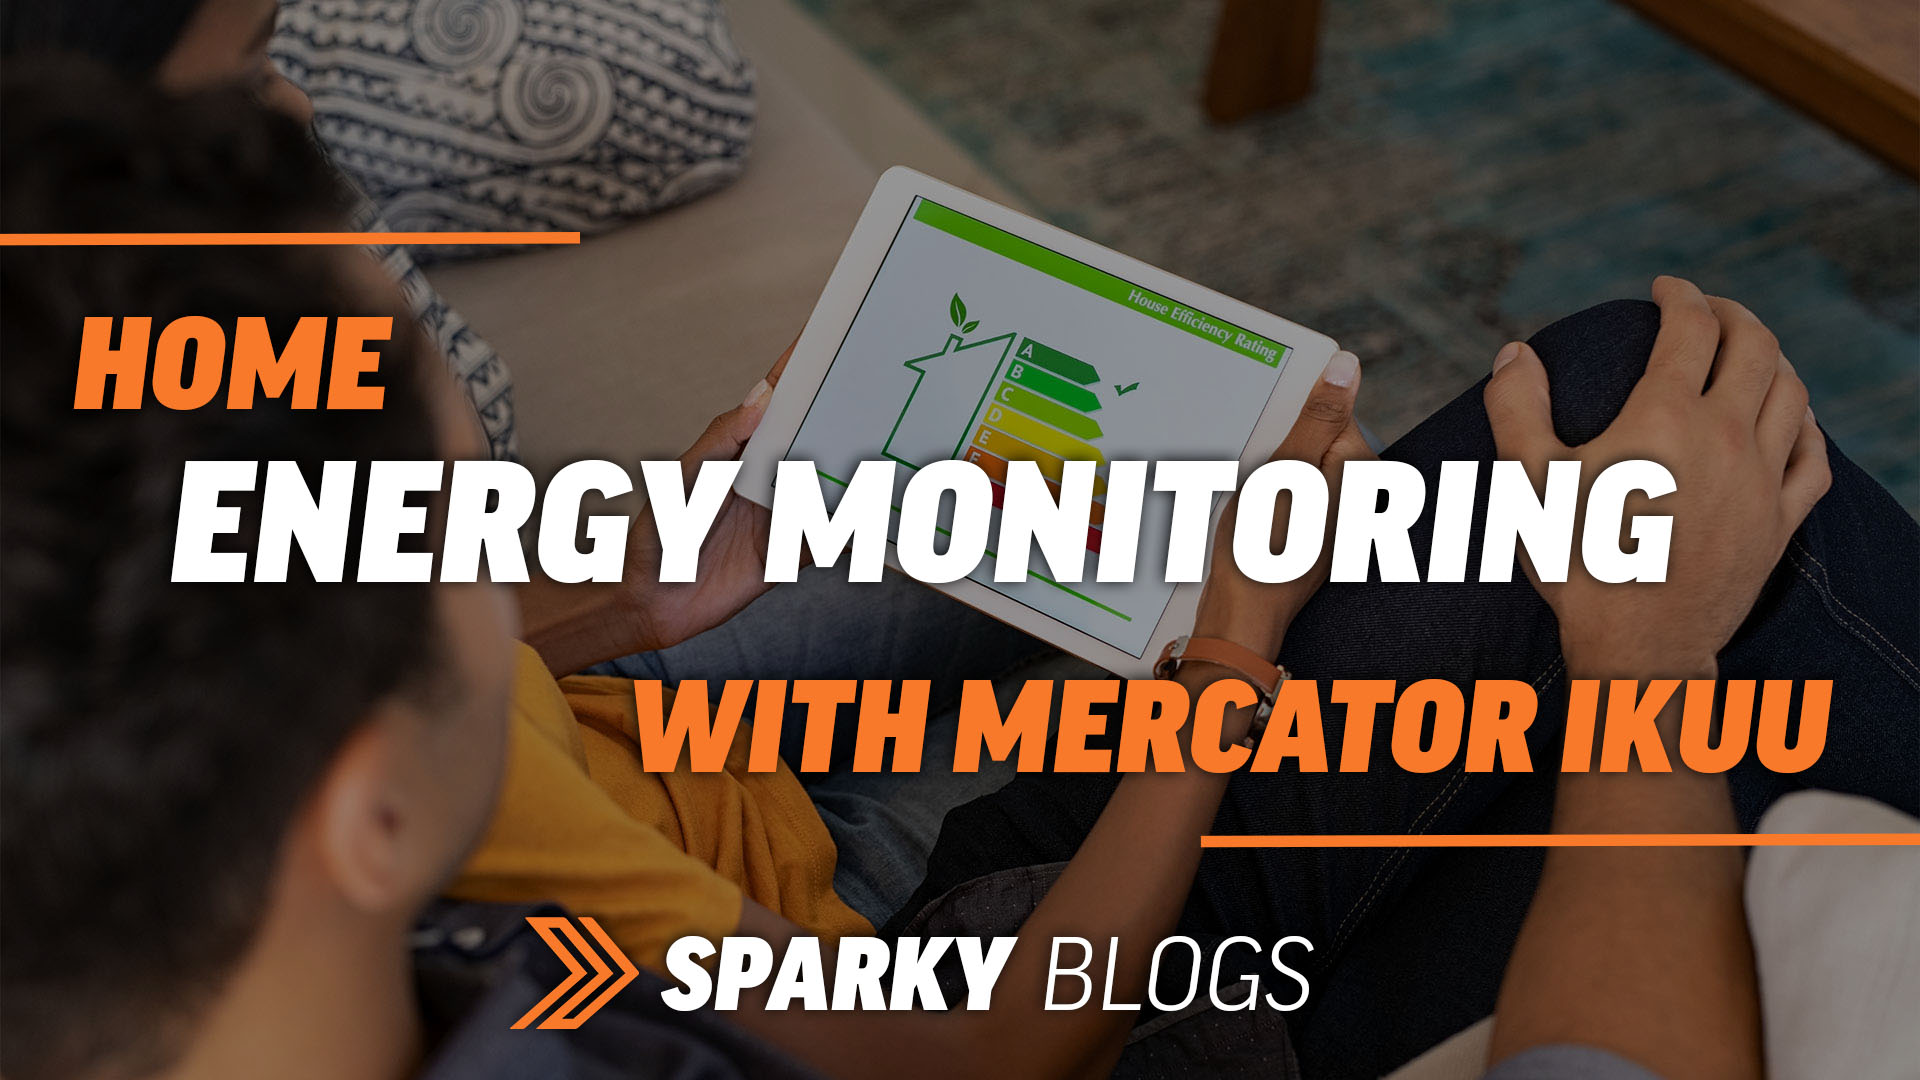 Smart Energy Management with Mercator Ikuü - A Sparky Direct Guide image